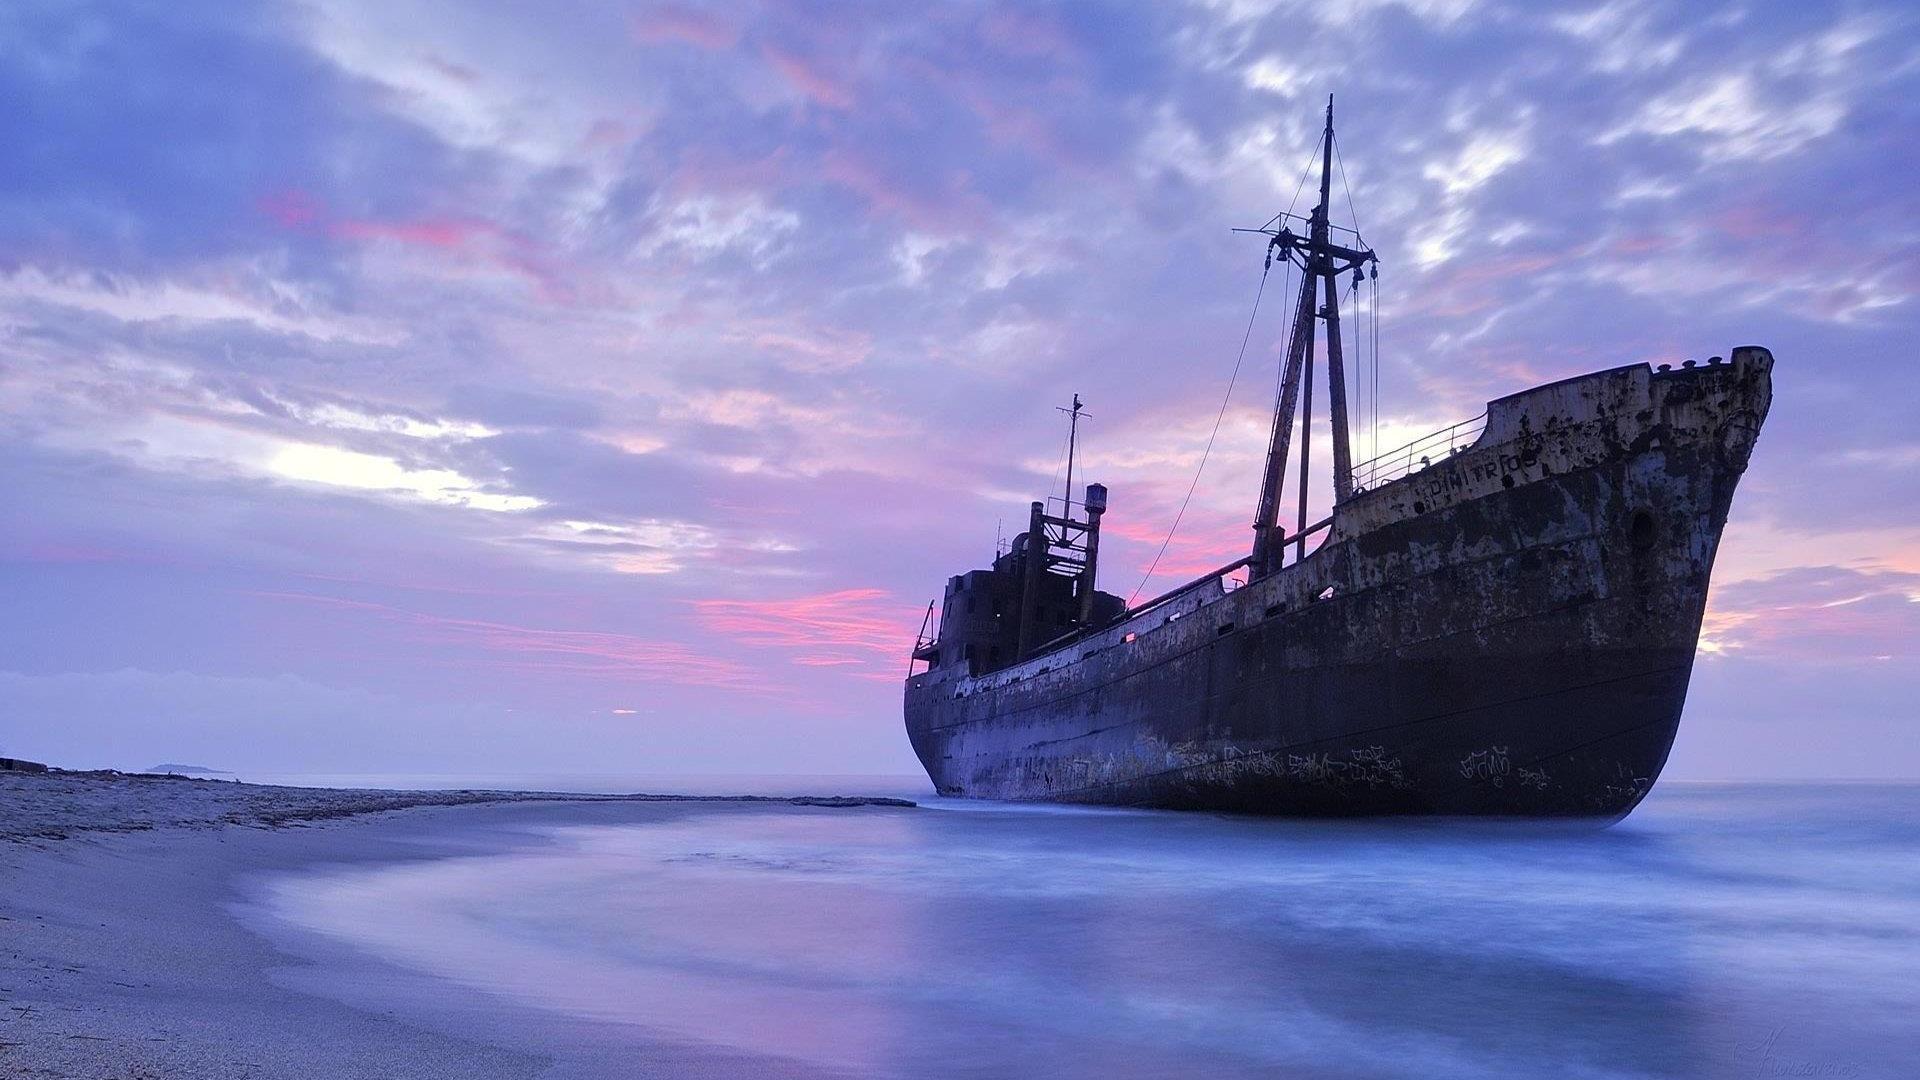 Shipwreck. Live wallpaper for Android